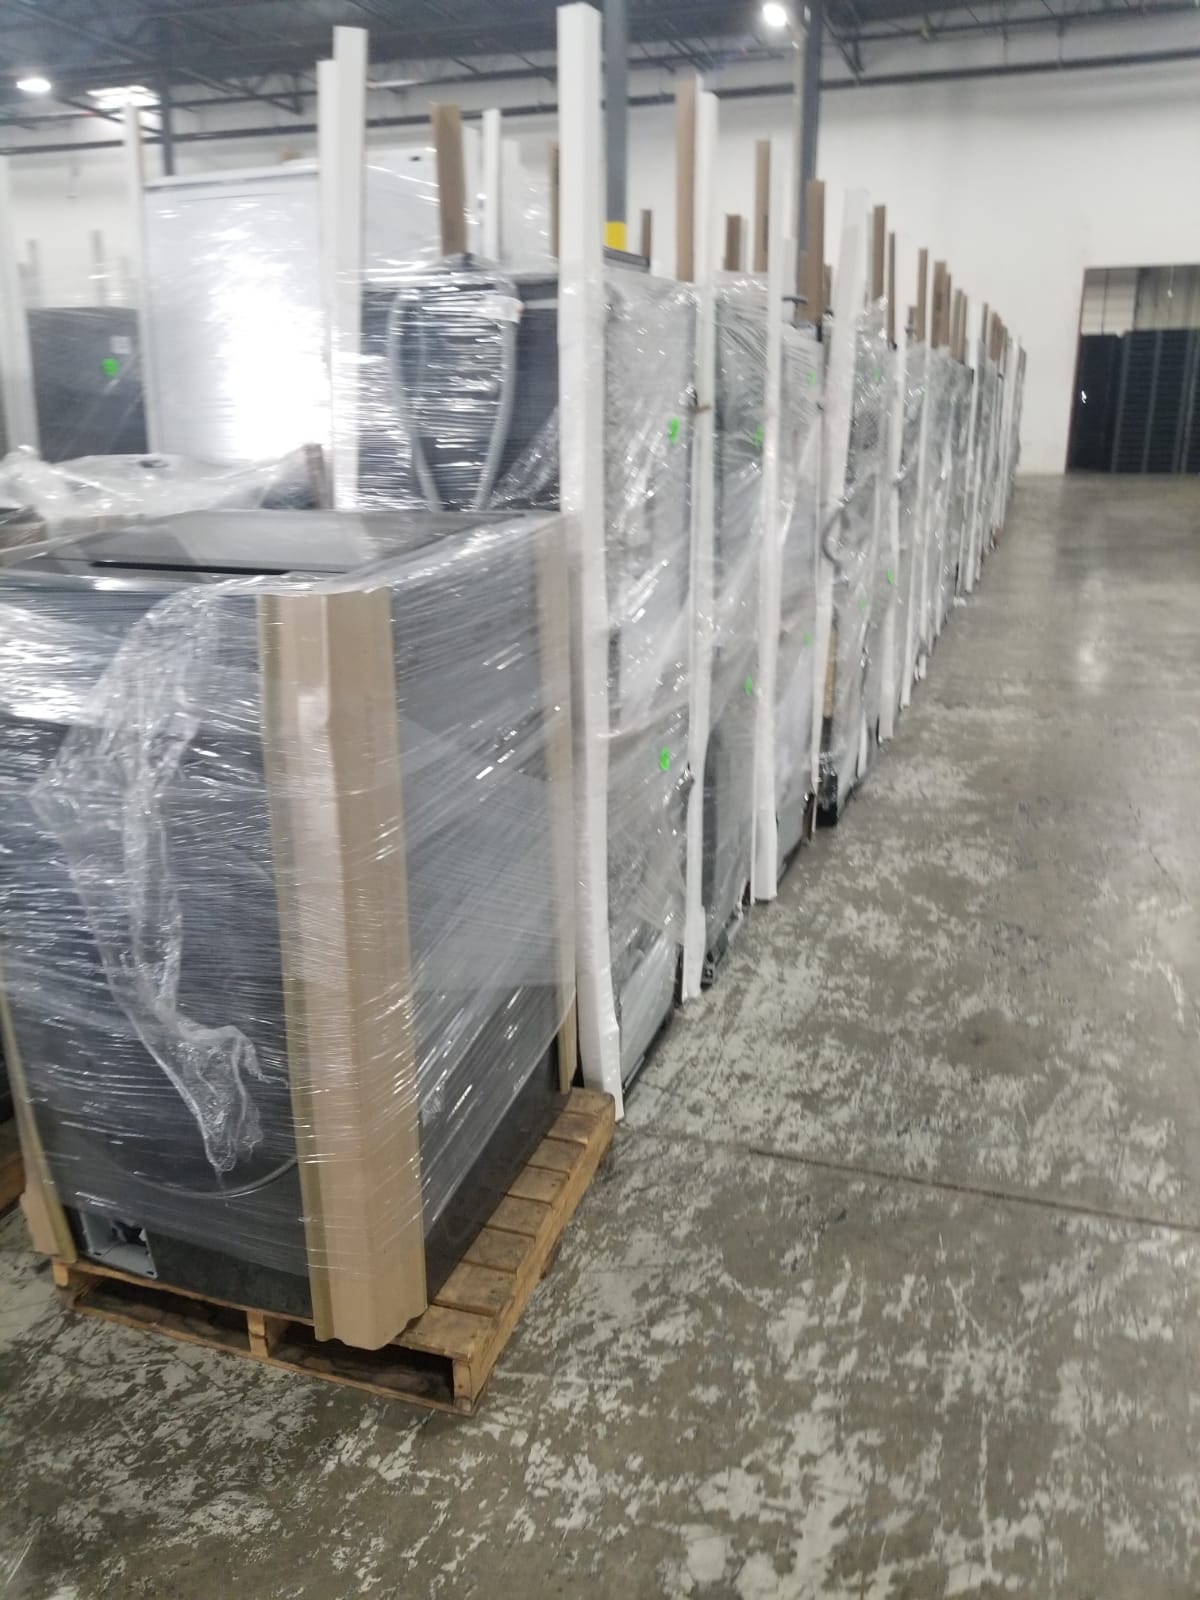 example of Outbound order from our Samsung wholesale truckload program.